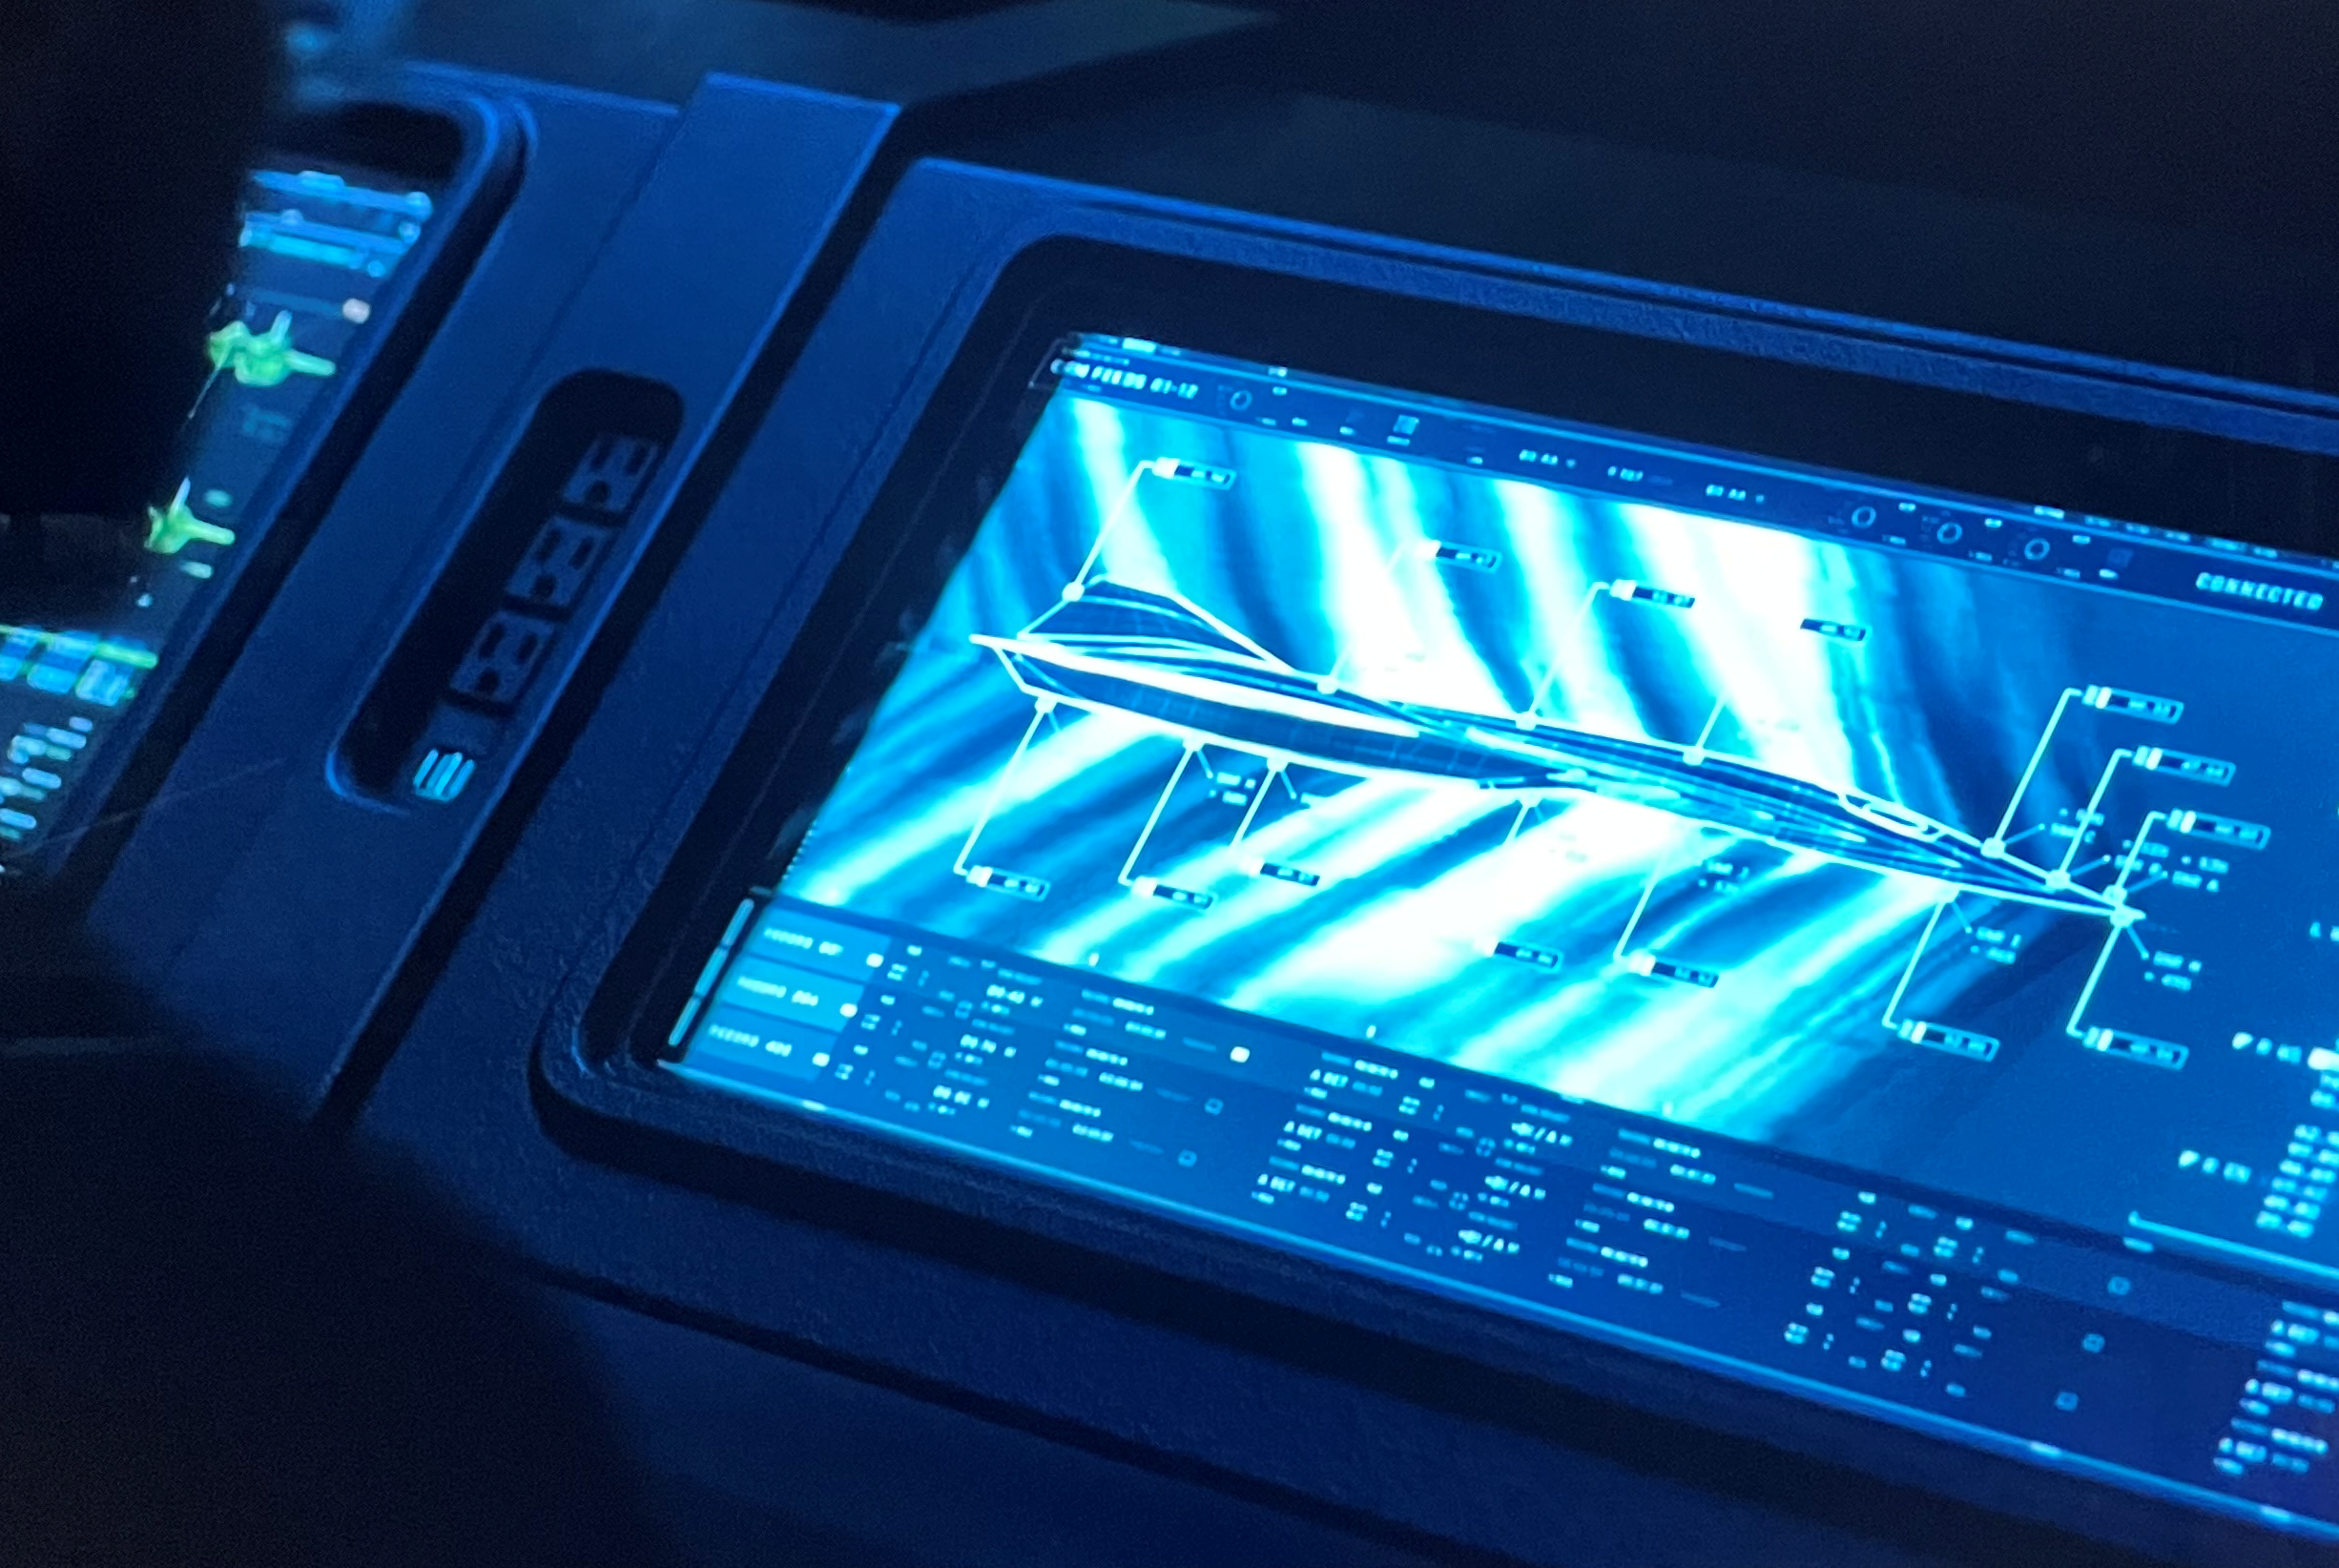 A close-up of the digital twin of the Darkstar showing the shock wave pattern on the screen in the control room.